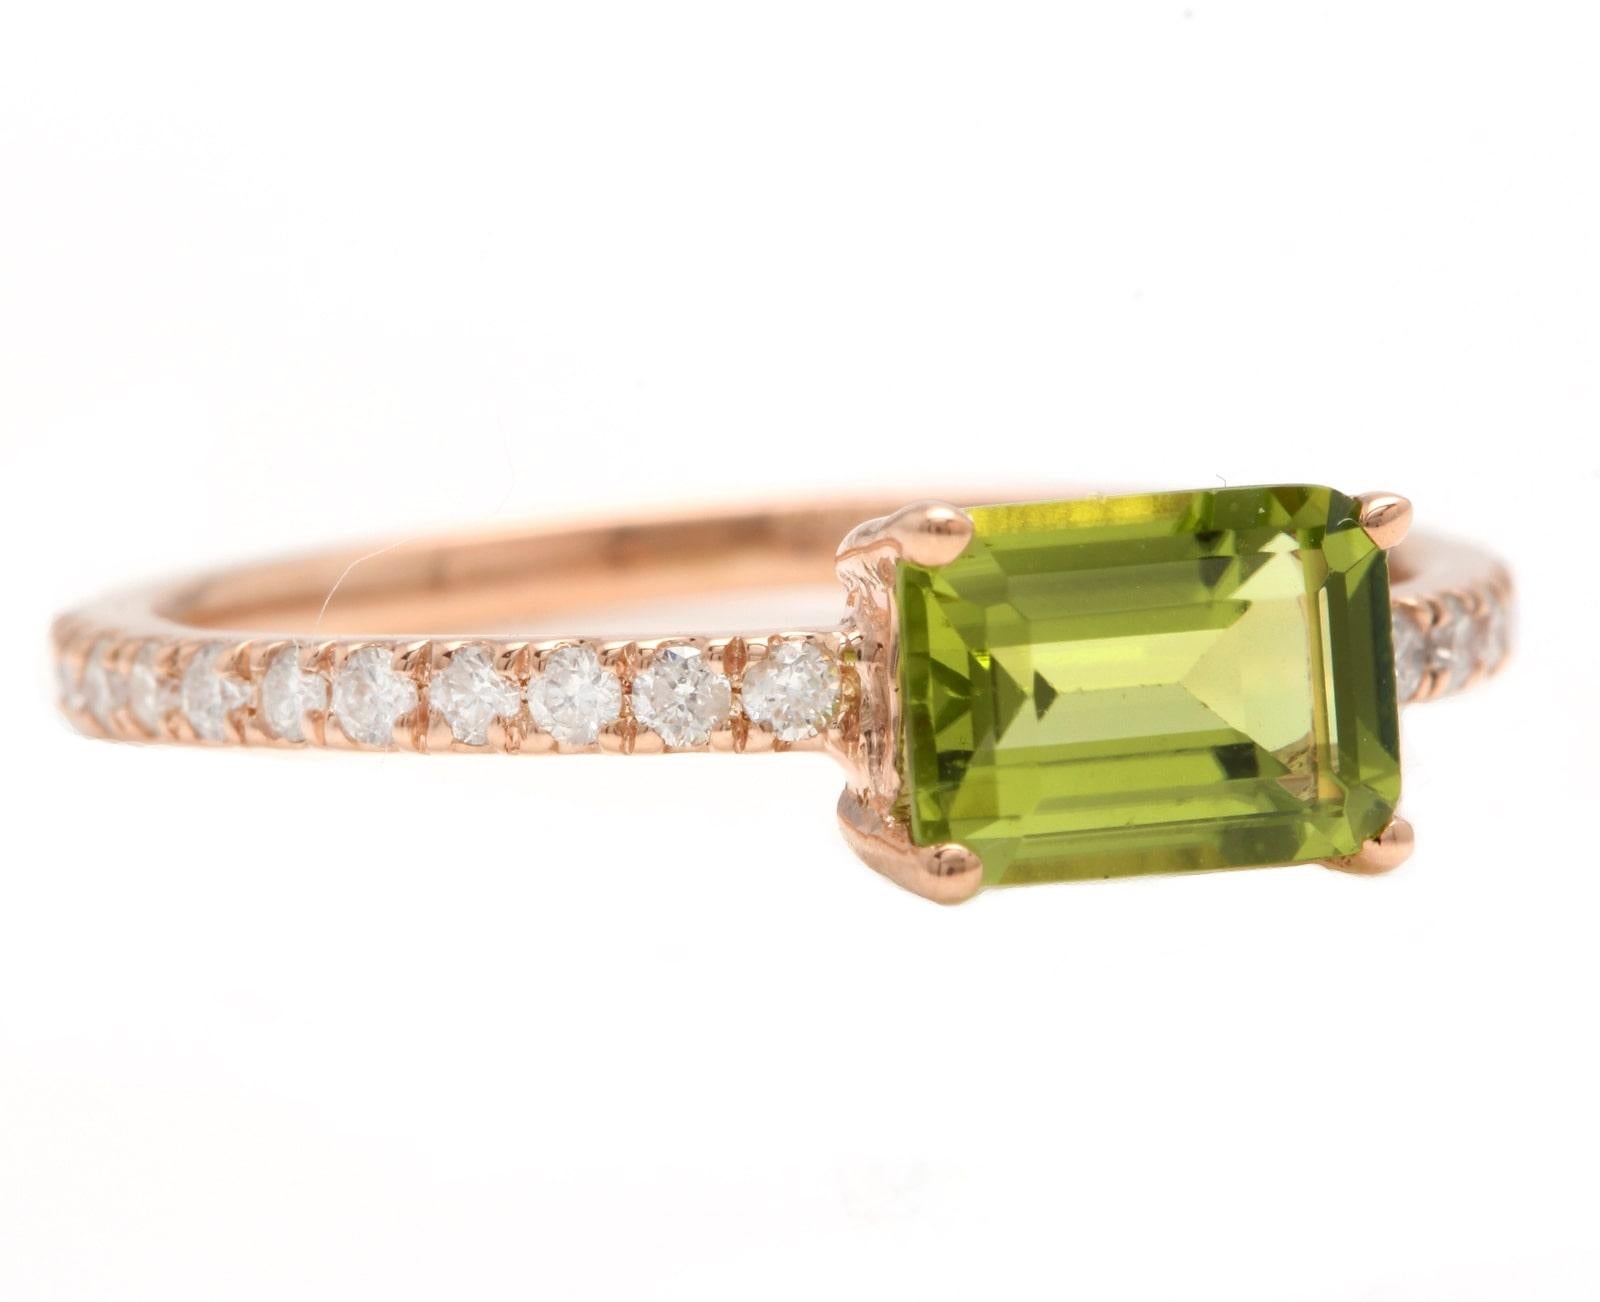 1.30 Carats Natural Peridot and Diamond 14K Solid Rose Gold Ring

Suggested Replacement Value: Approx. $1,300.00

Total Natural Peridot Weight is: Approx. 1.00 Carats

Peridot Measures: Approx. 7.00 x 5.00mm

Natural Round Diamonds Weight: Approx.